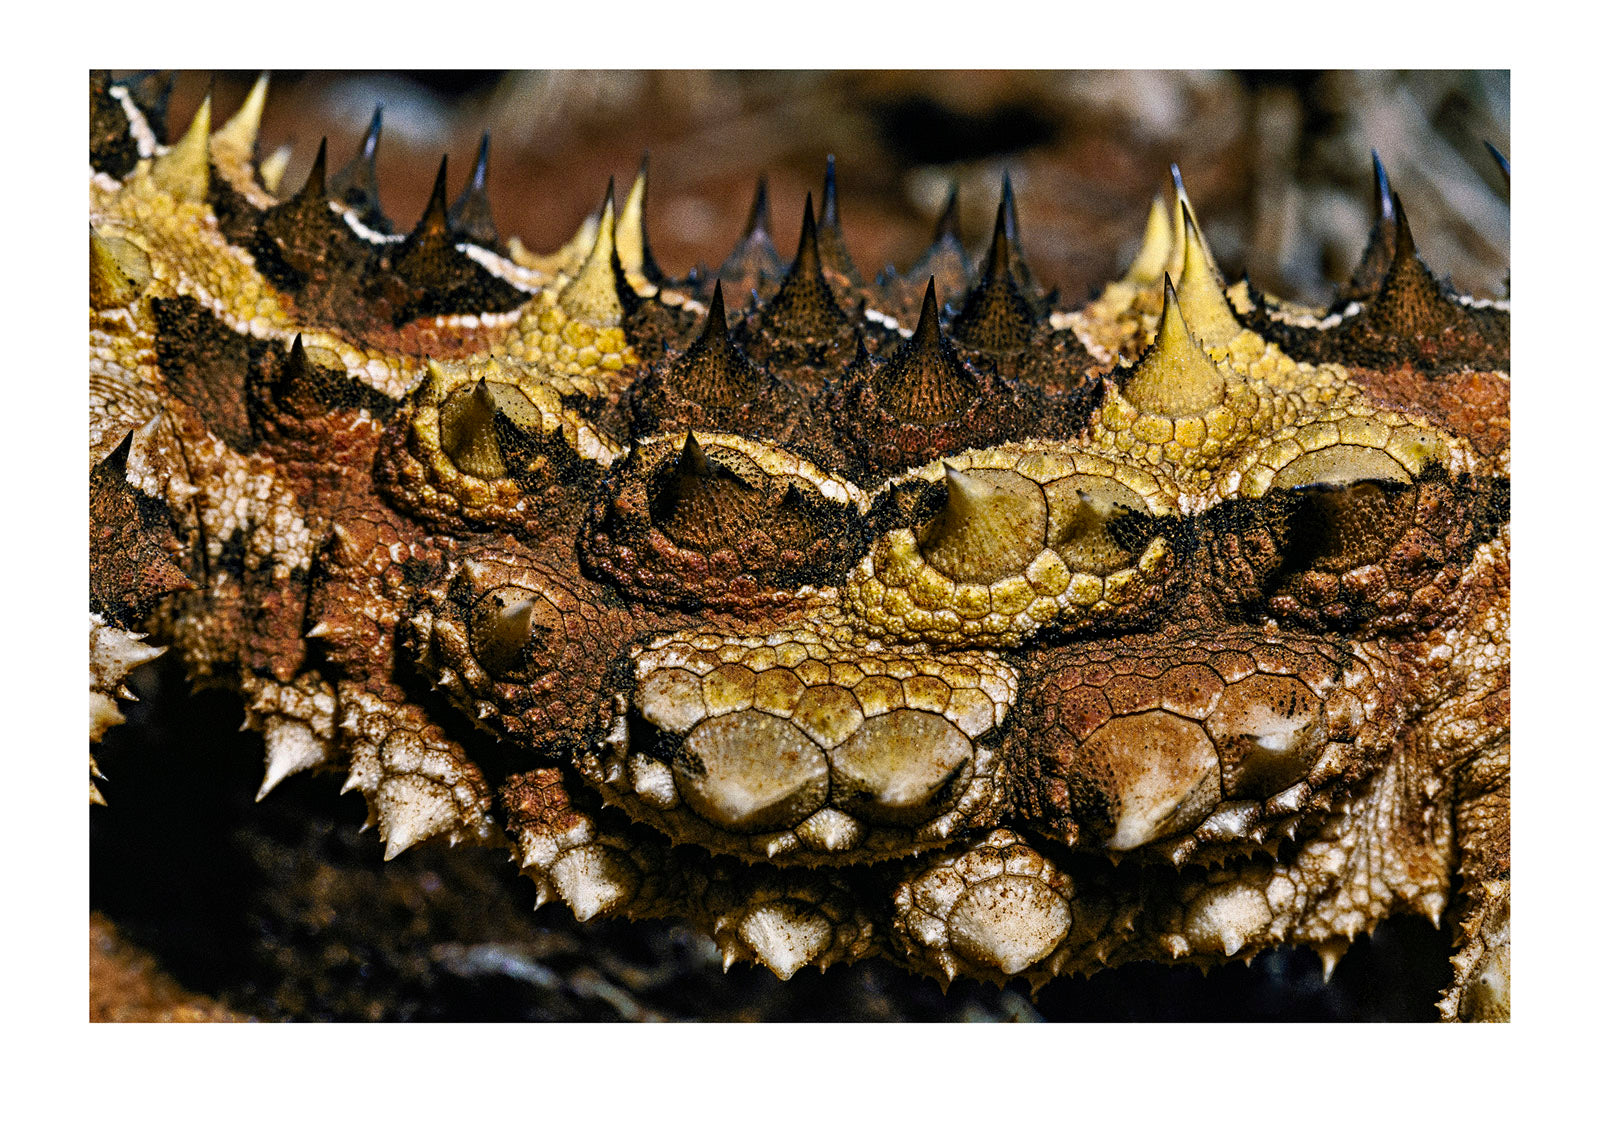 A close-view of the jagged skin and thorns of a thorny devil lizard. Unnamed Conservation Park, South Australia, Australia.